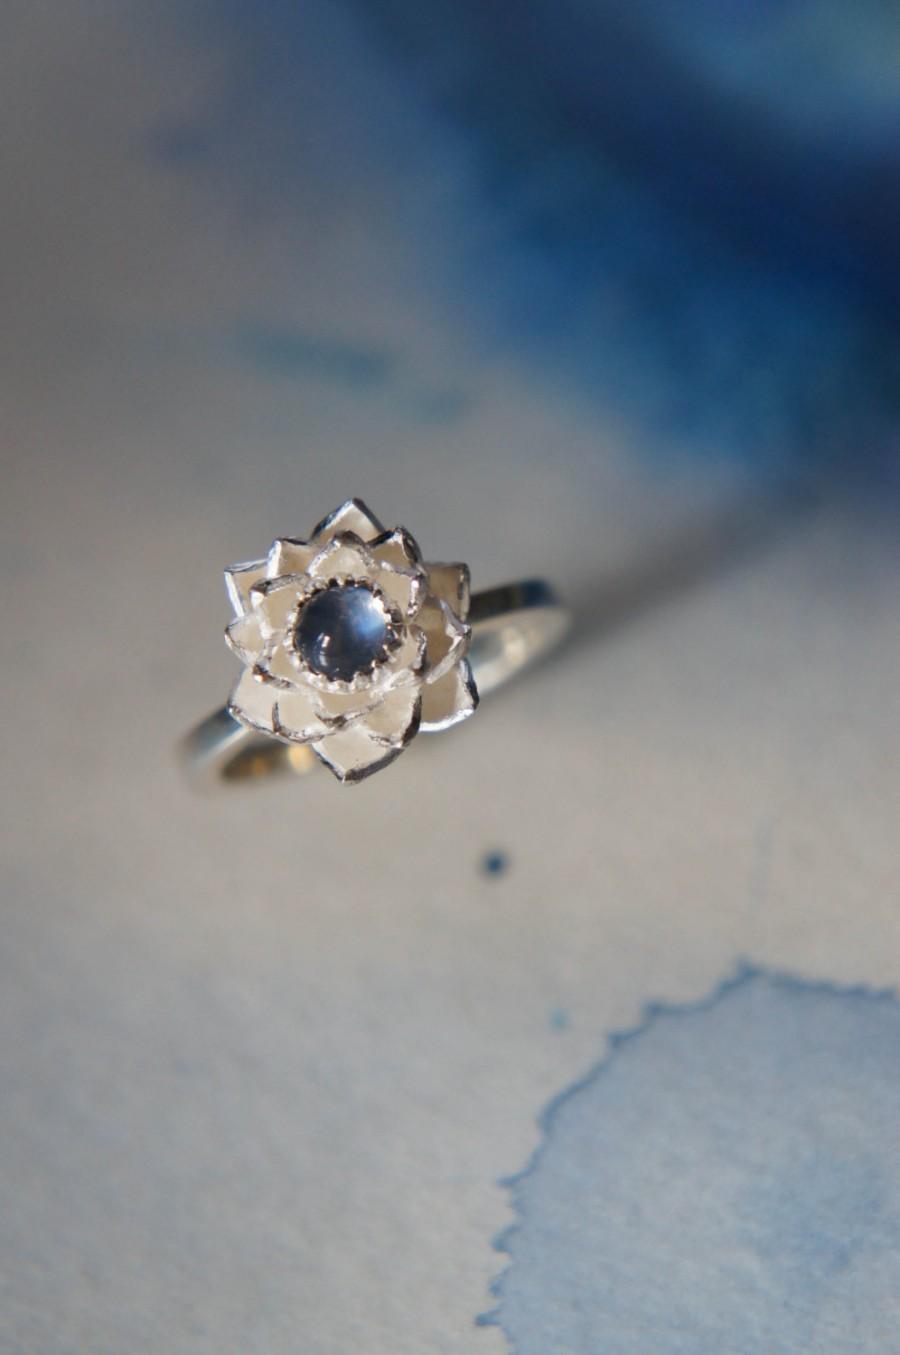 Hochzeit - Lotus ring, blue moonstone ring, sterling silver ring, flower ring, engagement ring, proposal ring, promise ring, floral jewelry, romantic